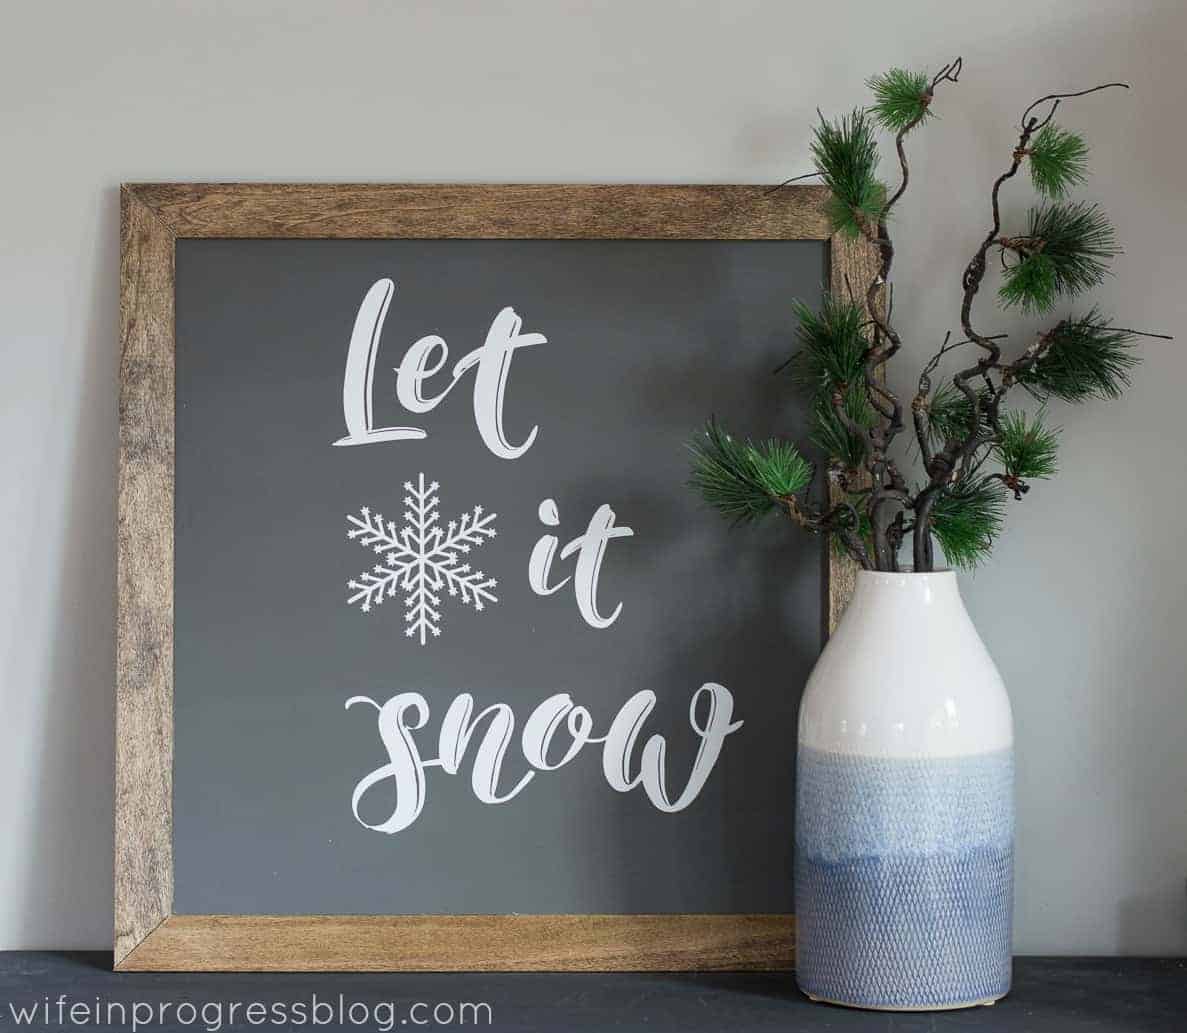 This Let it Snow farmhouse style sign is simple DIY Christmas decor that you can use for years to come!